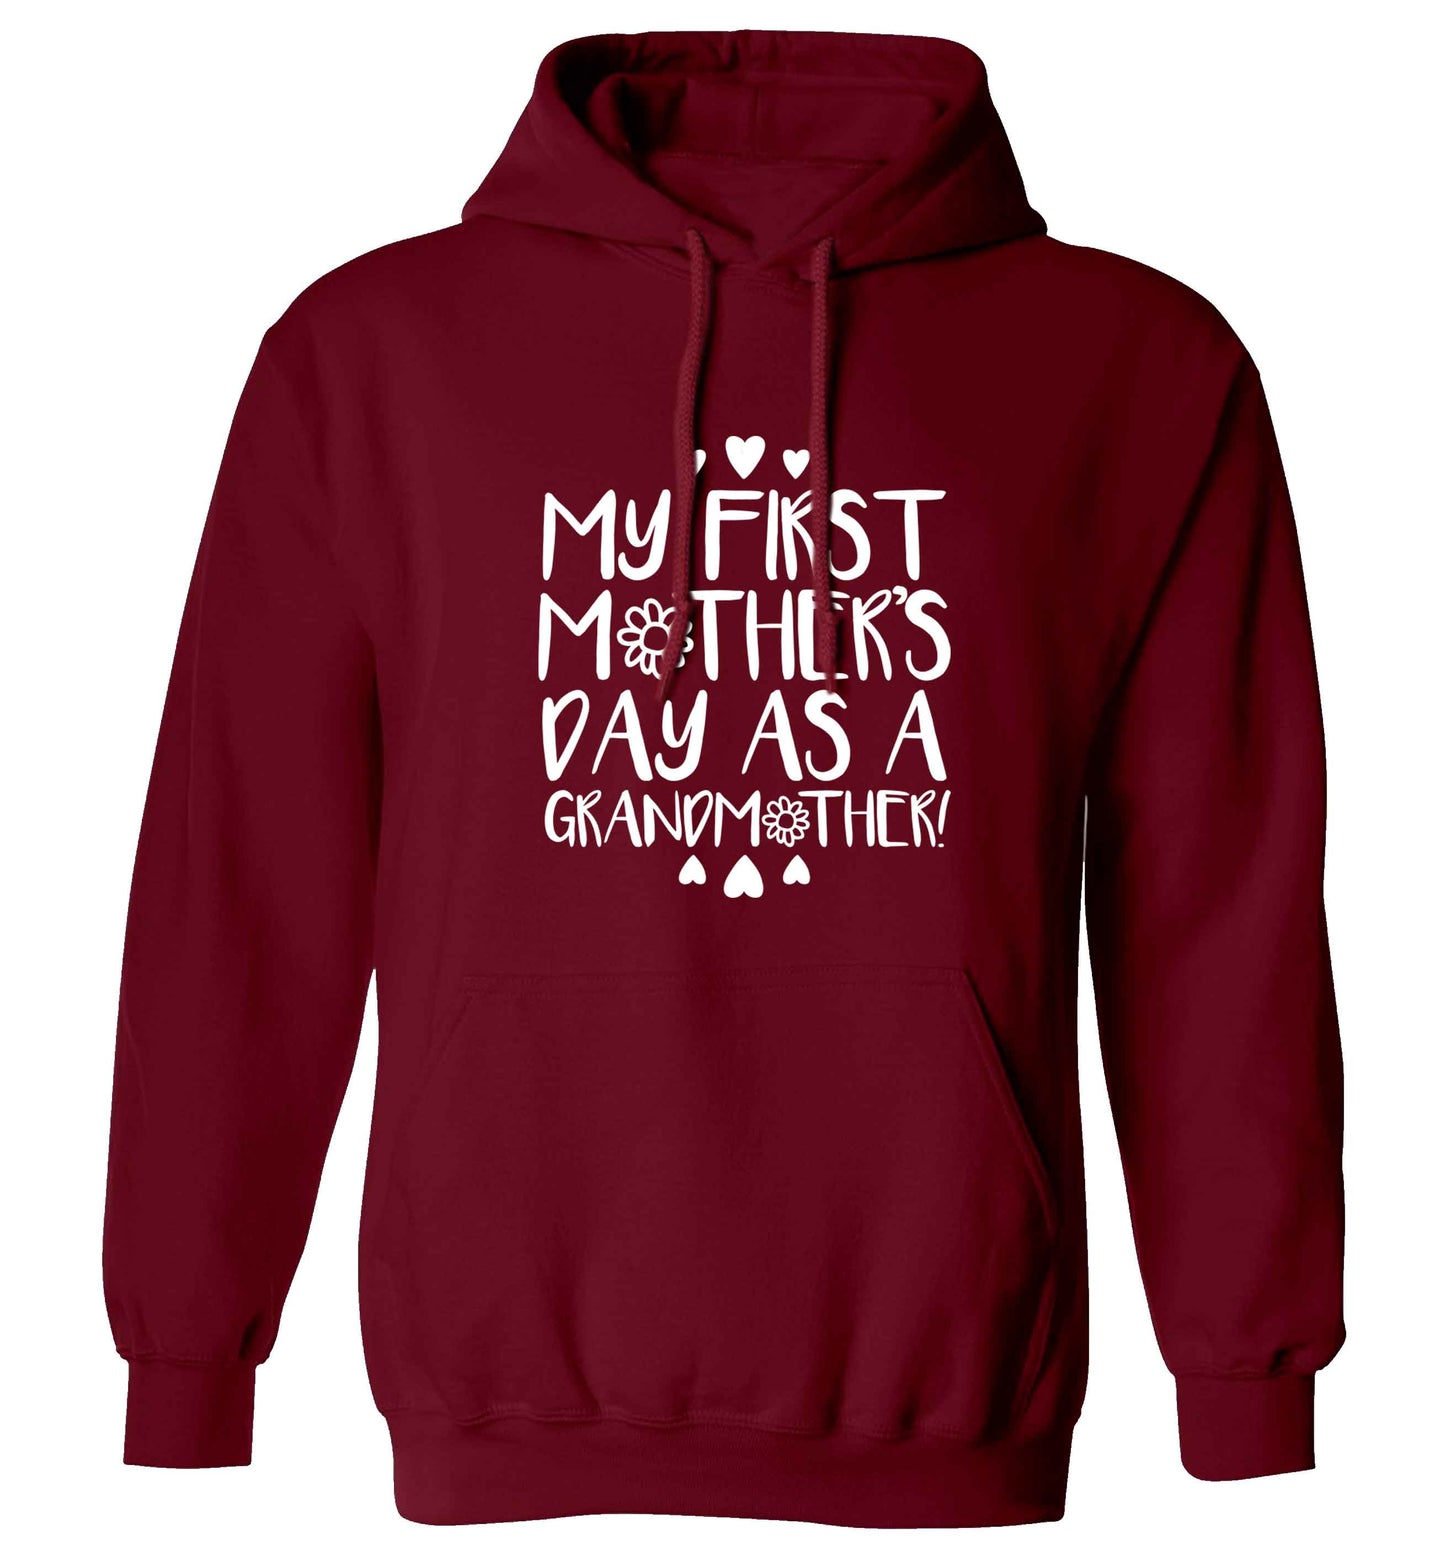 It's my first mother's day as a grandmother adults unisex maroon hoodie 2XL